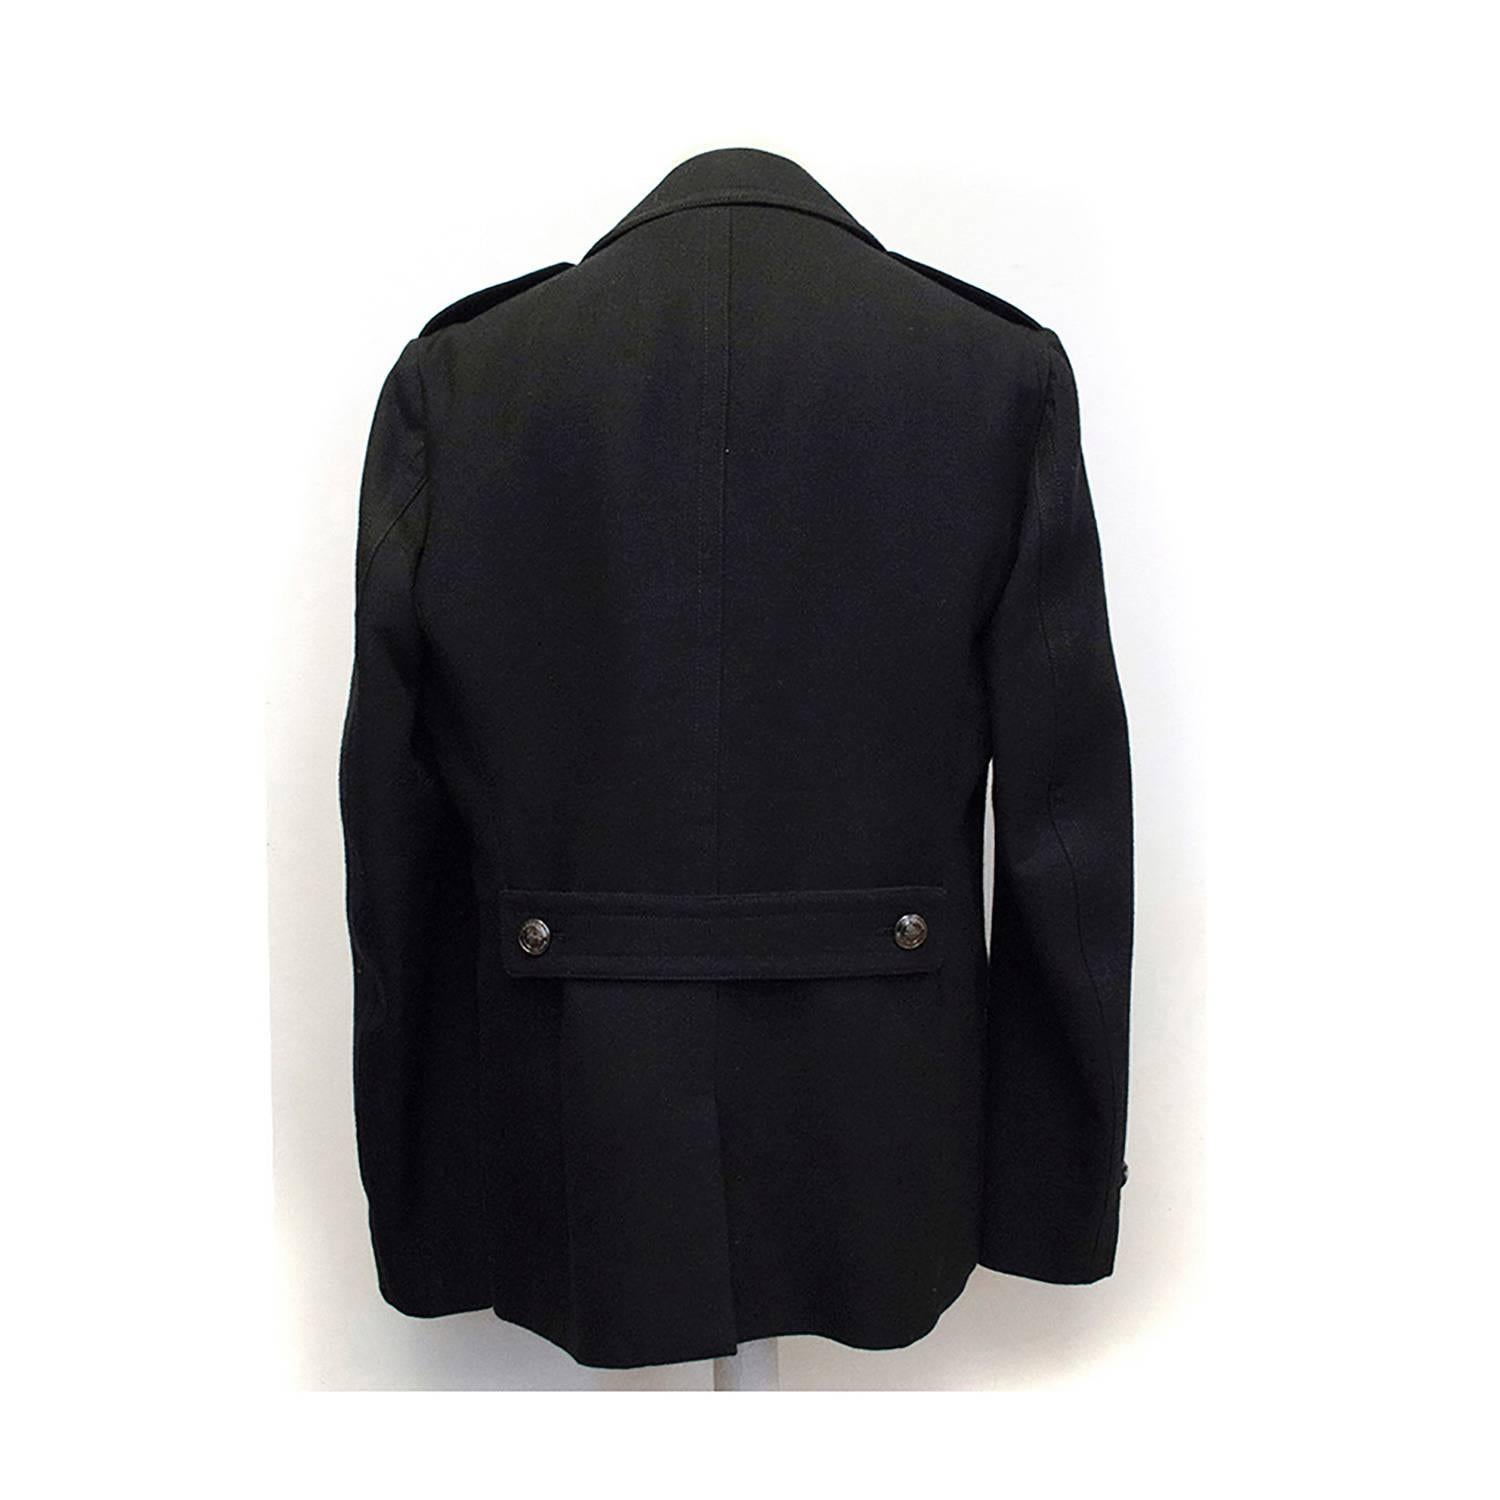 Burberry Black Double Breasted Coat. Hardly ever worn, Button missing on shoulder flap, apart from this item is in perfect condition 9.5/10. 

Approx measuremets: 
Shoulders: 44cm 
Length: 72cm 
Sleeve:69.5cm

Fabric - 100% Wool
